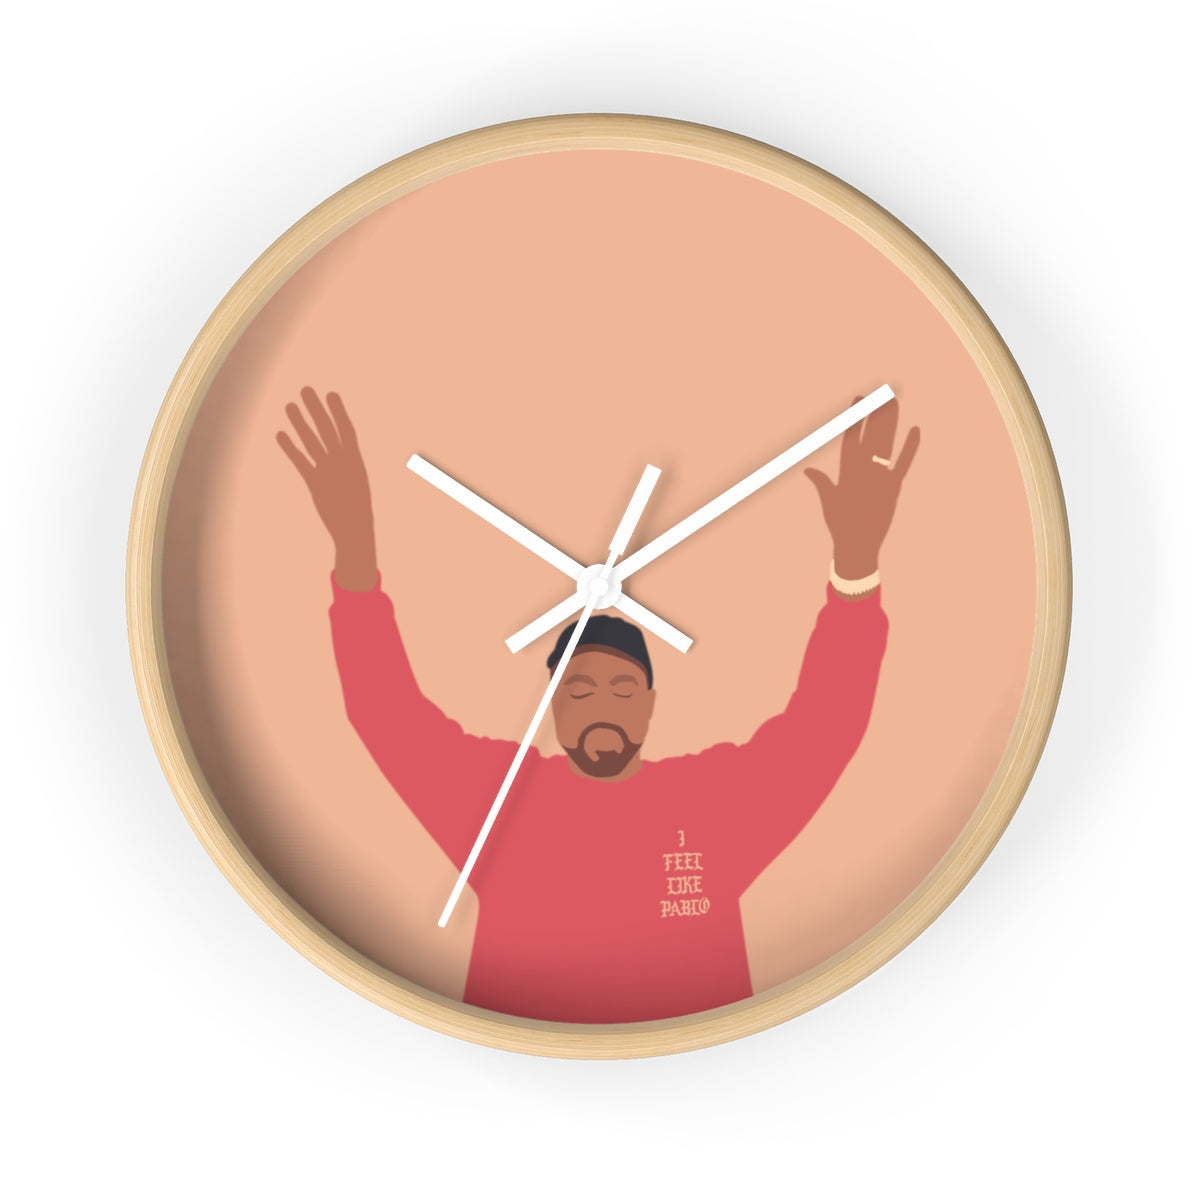 Kanye West I Feel Like Pablo Wall clock - The Life of Pablo TLOP tour merch inspired-10 in-Wooden-White-Archethype